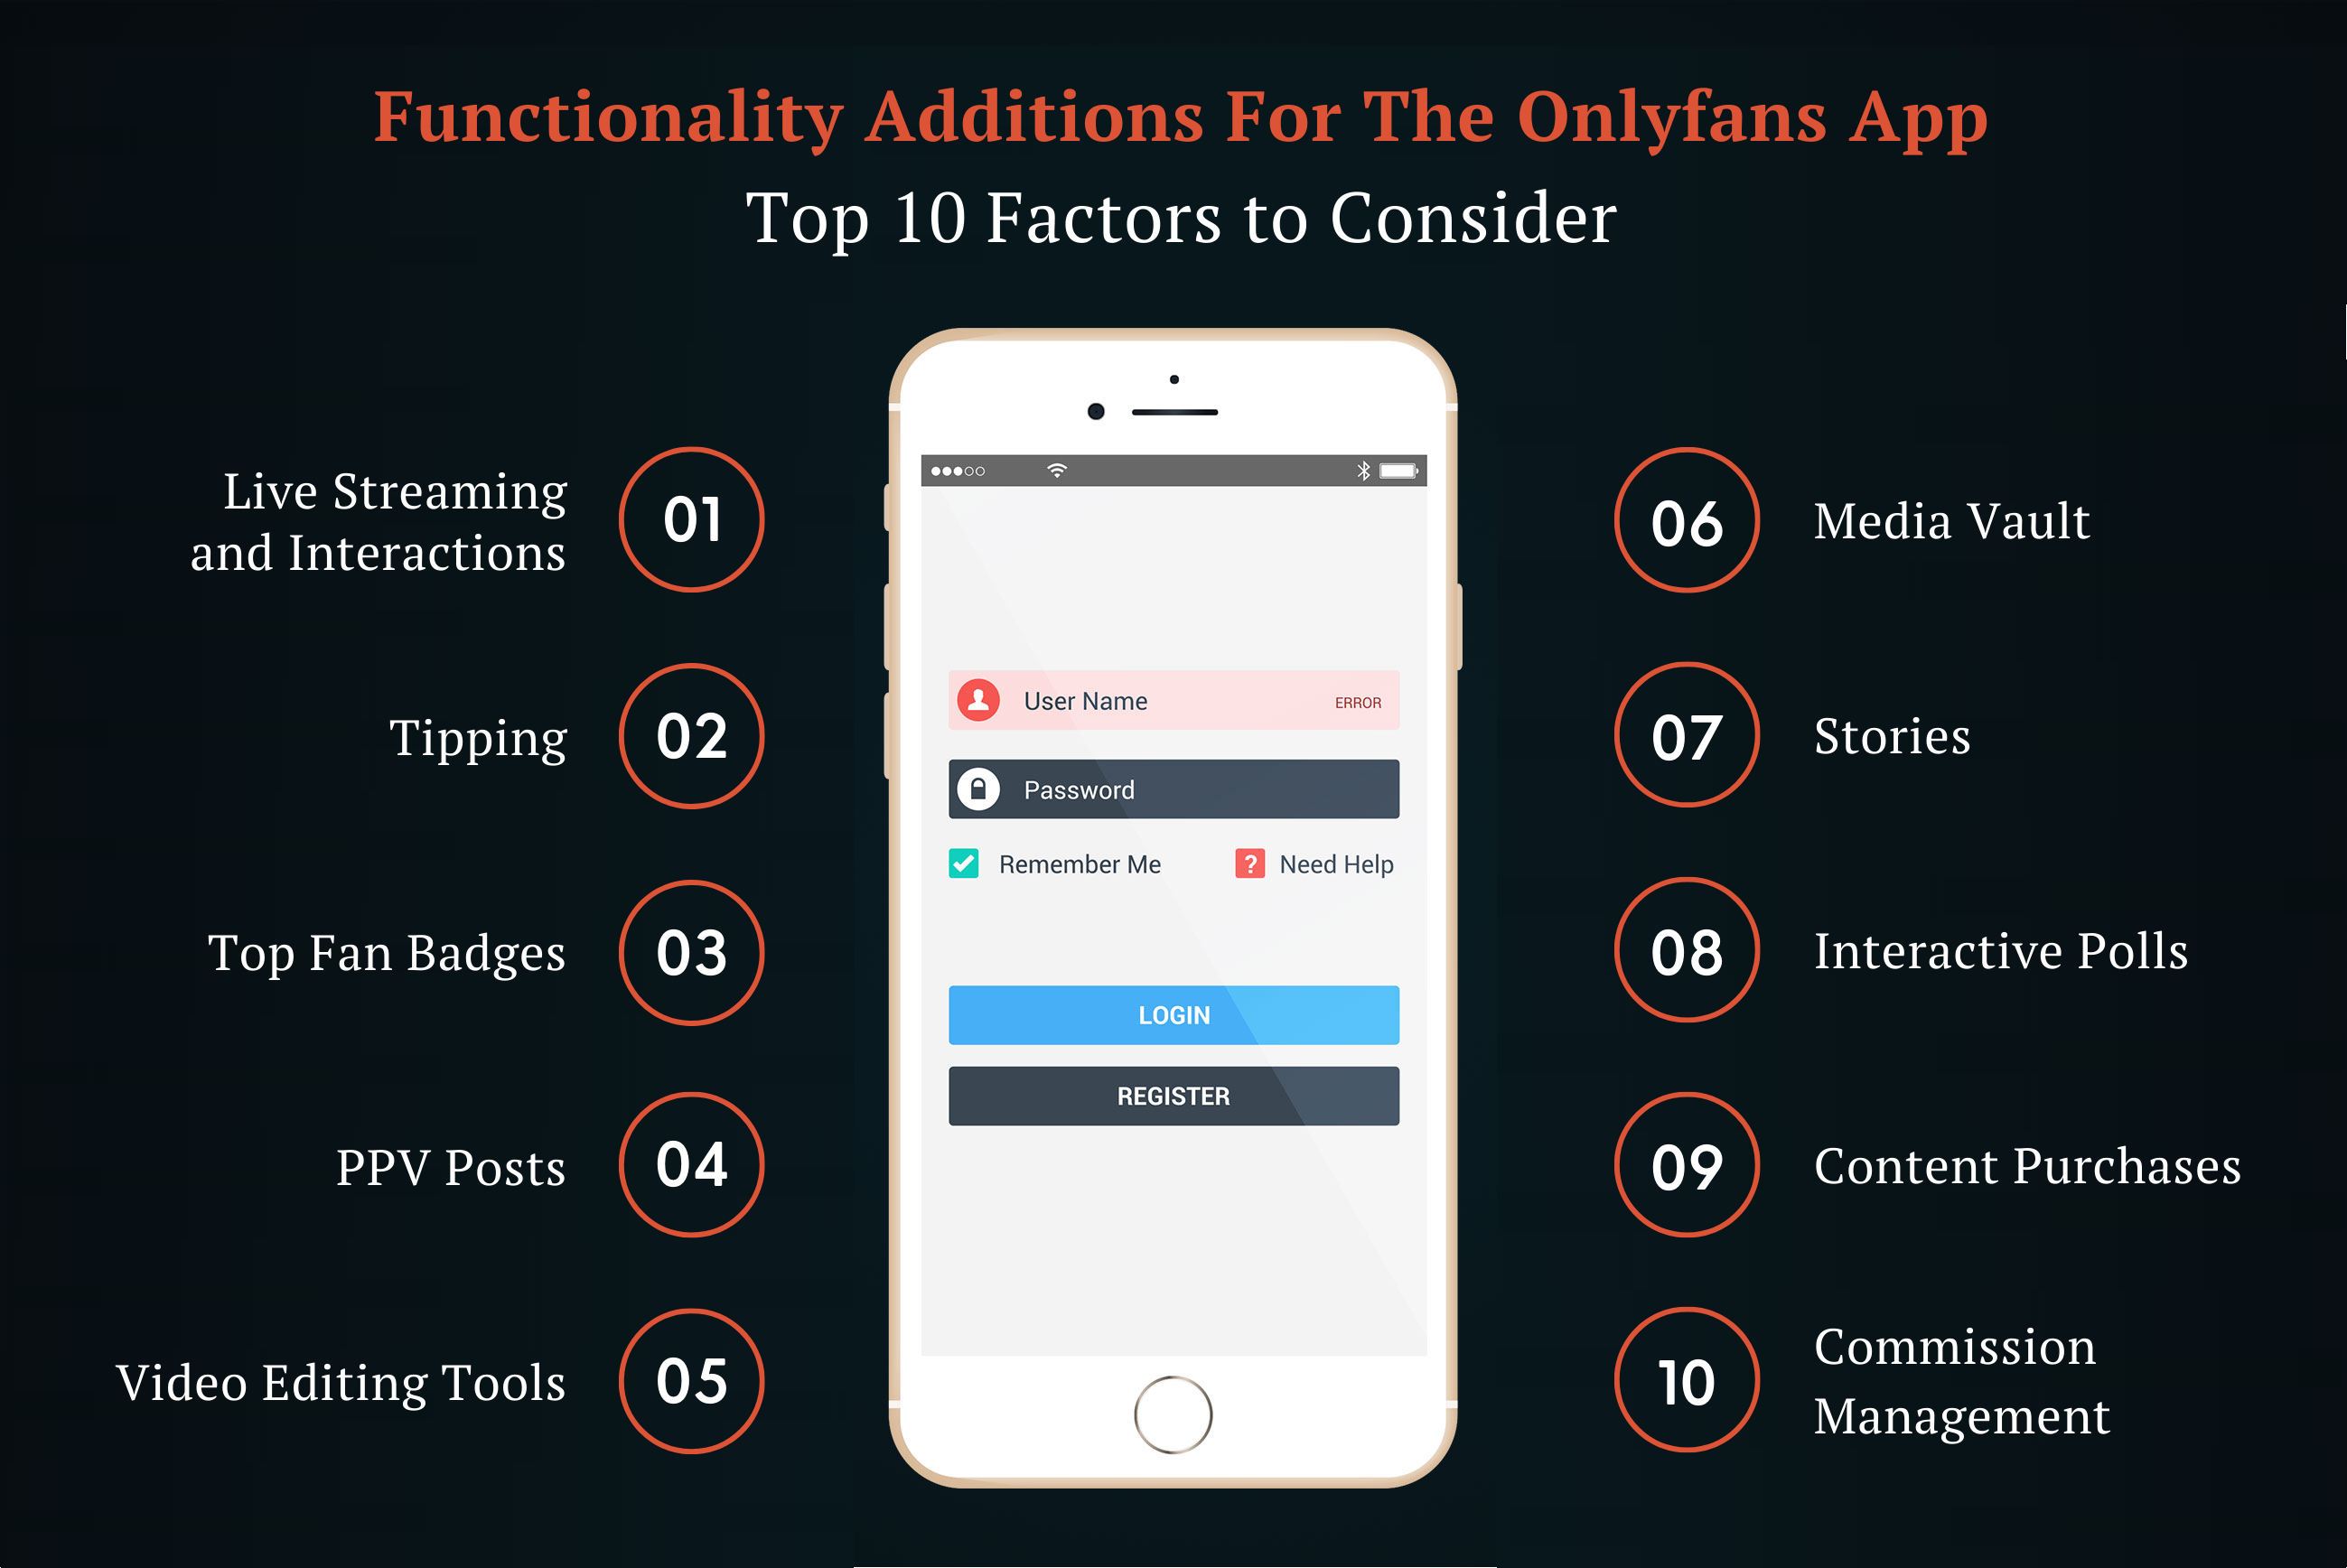 Functionality Additions to Consider for OnlyFans App